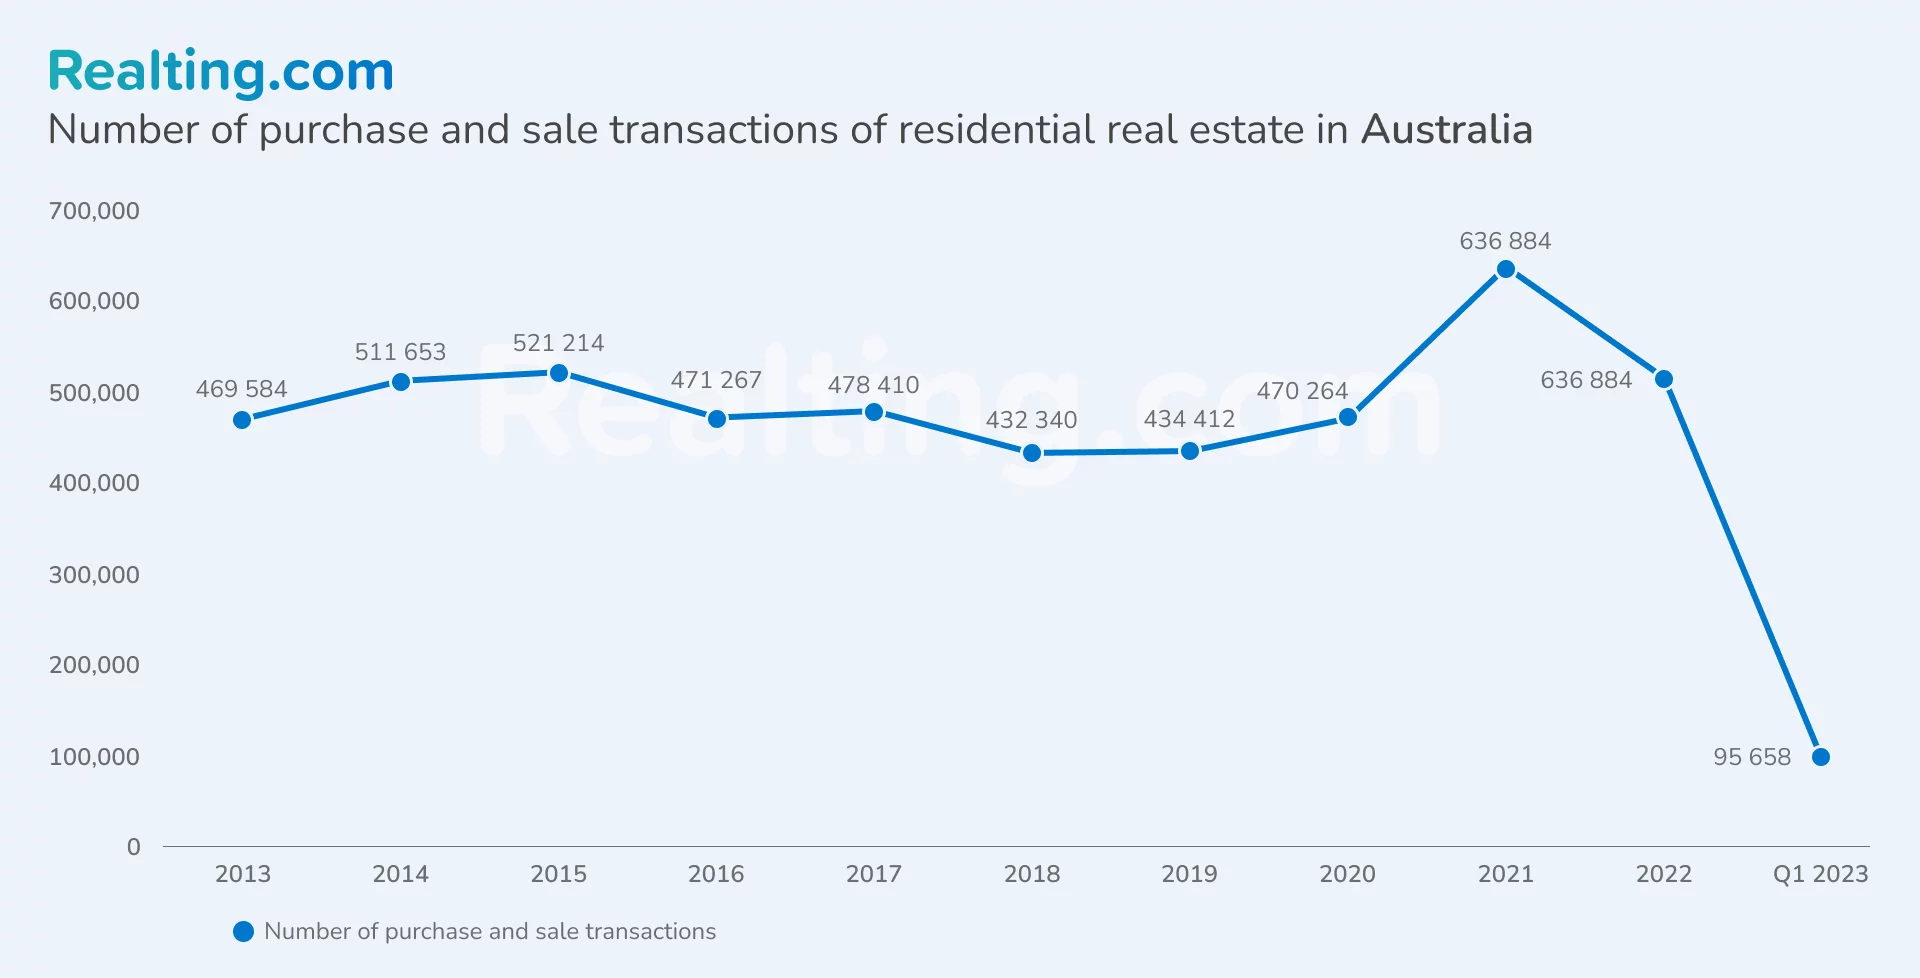 Number of purchase and sale transactions of residential real estate in Australia